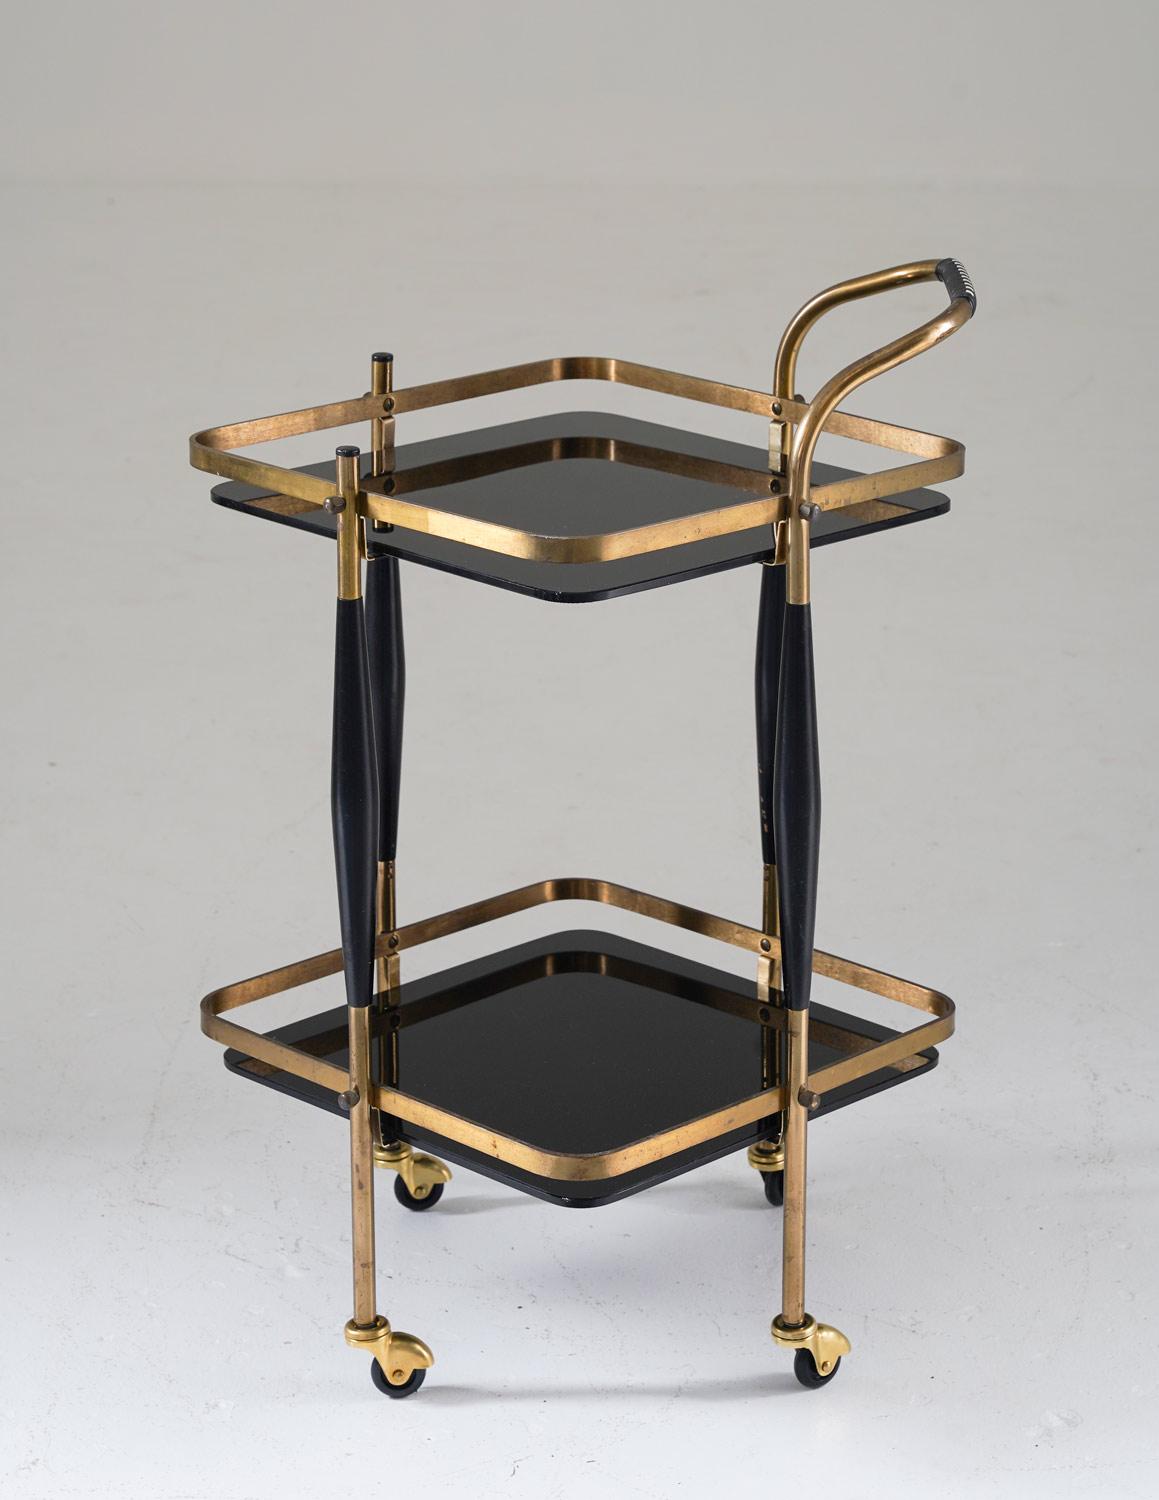 A beautiful bar cart made of brass with black wooden details and a table top in glass, probably produced in Sweden. 
Beautiful design and well matched materials make this piece a good fit in a modern home. It consists of a frame in brass and wood